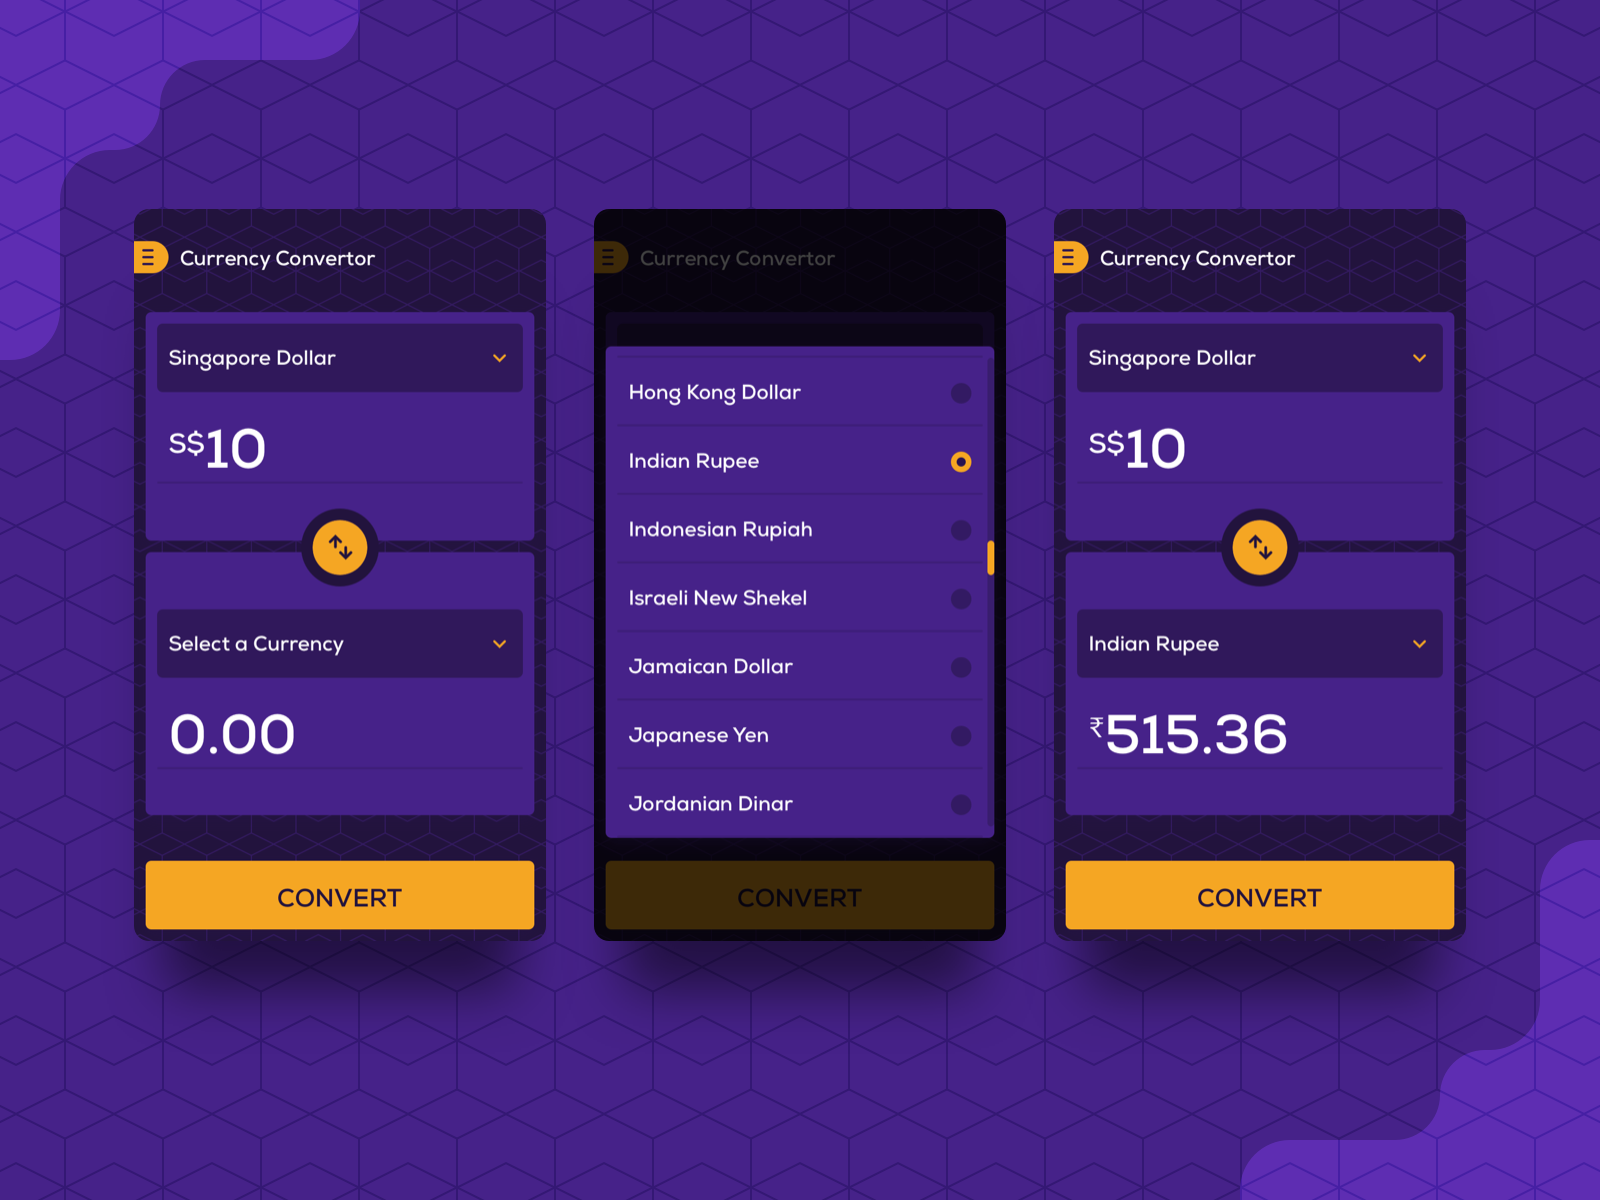 Currency Converter by Dhruv Parnami on Dribbble